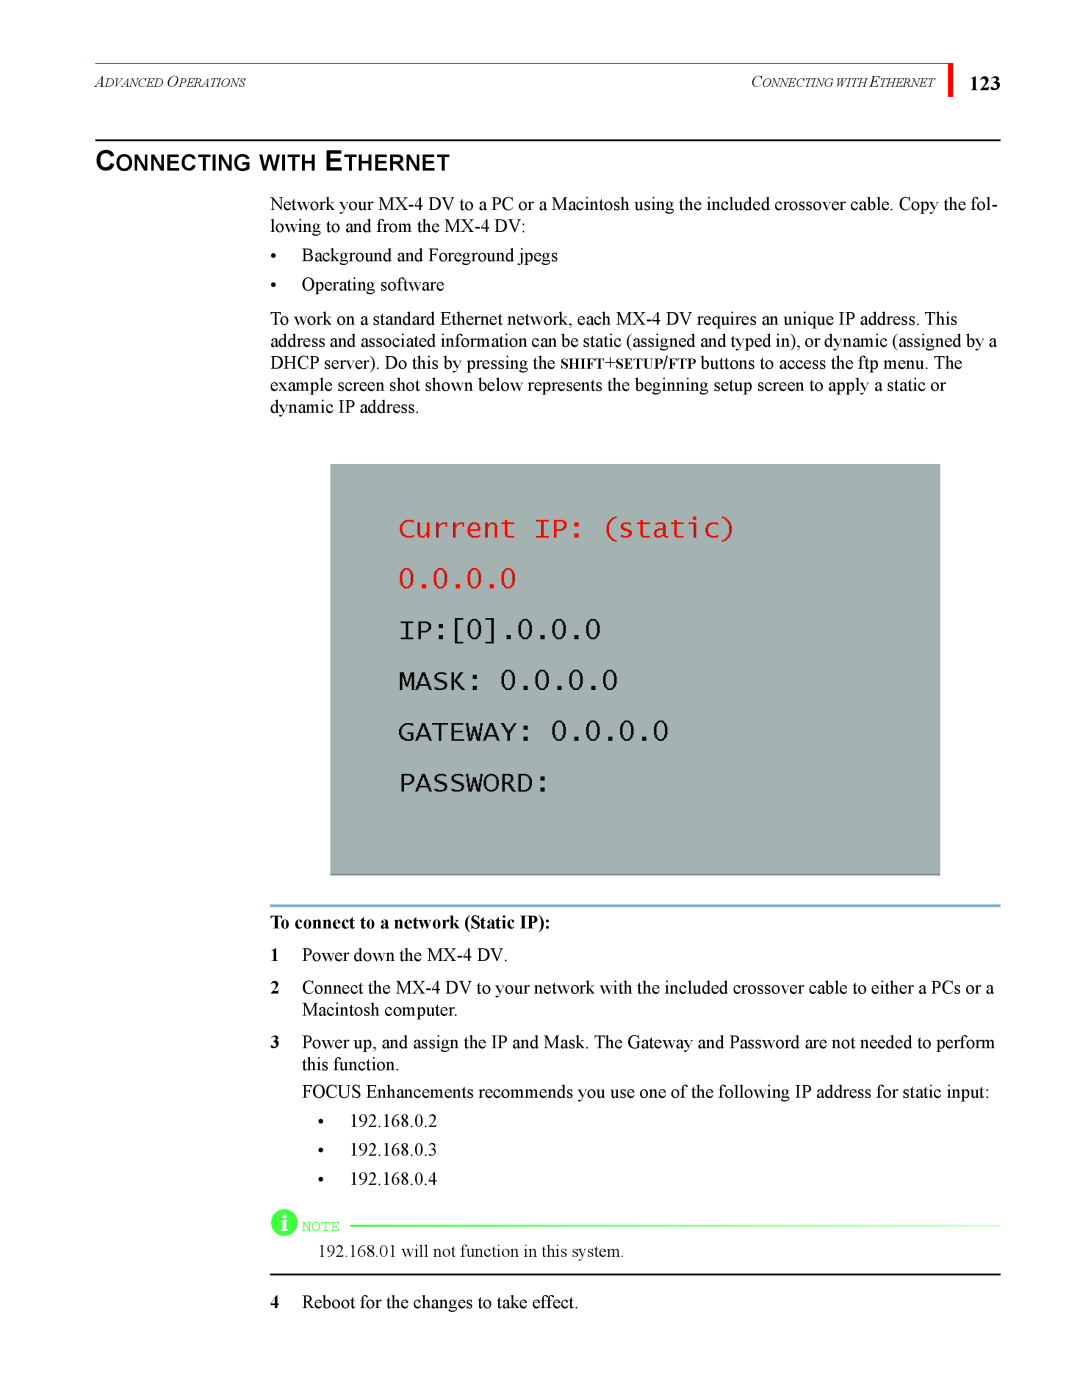 FOCUS Enhancements MX-4DV manual Connecting With Ethernet, To connect to a network Static IP 